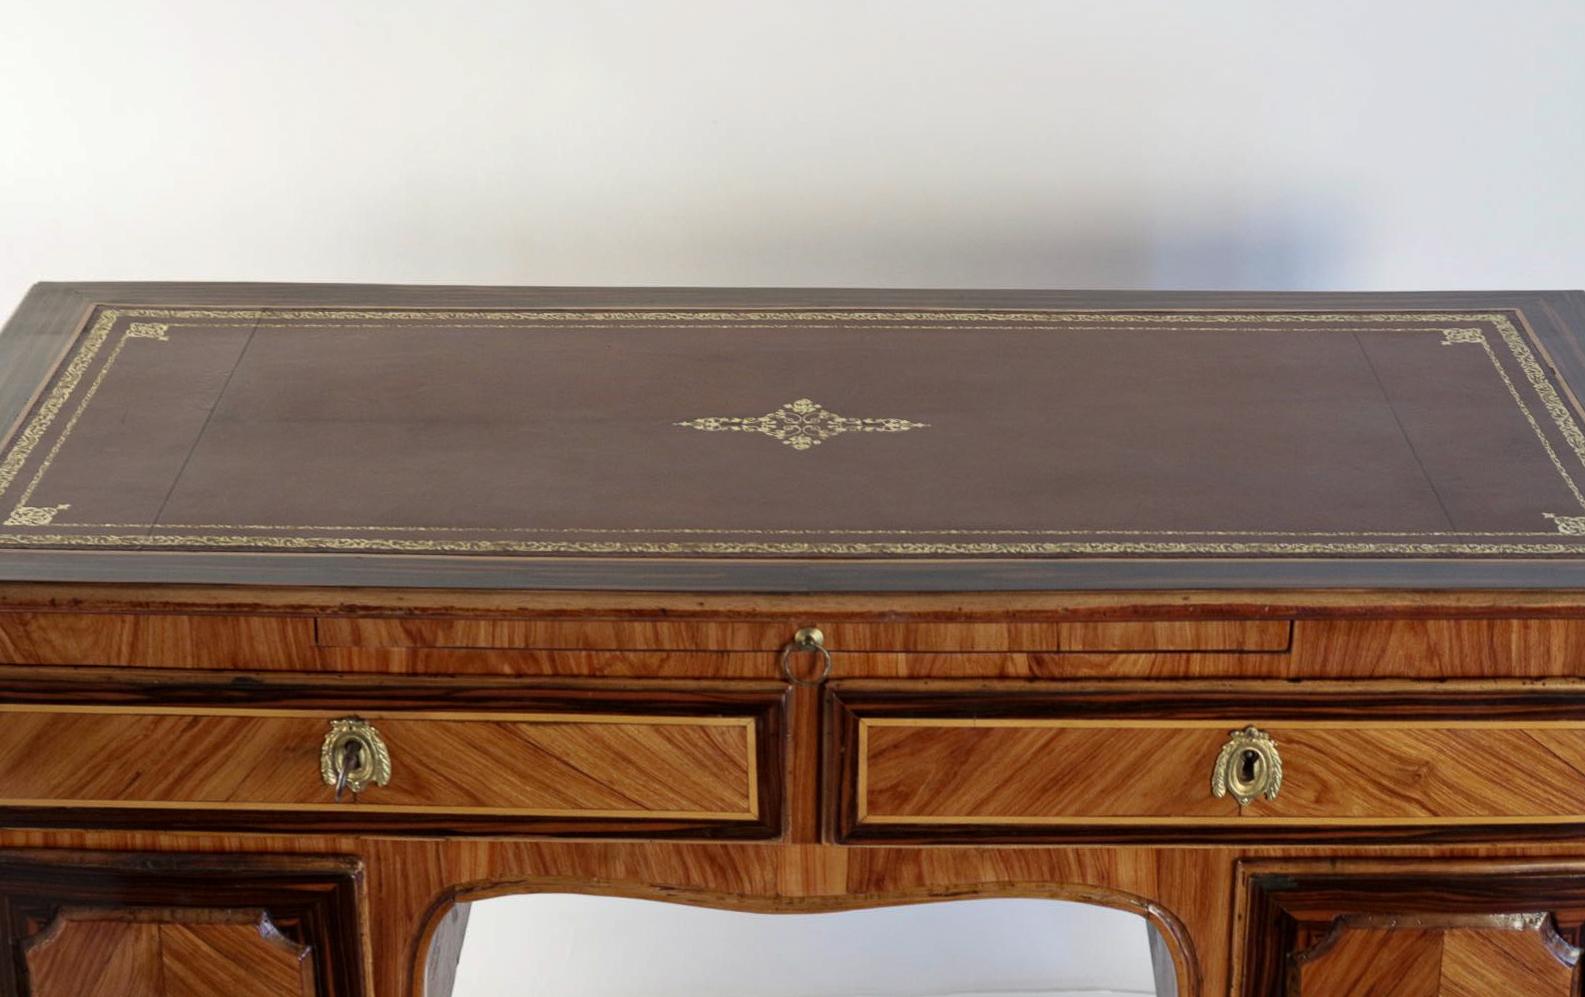 Patinated Italian Flat-Top Desk, Mid-18th Century, circa 1750-1760 For Sale